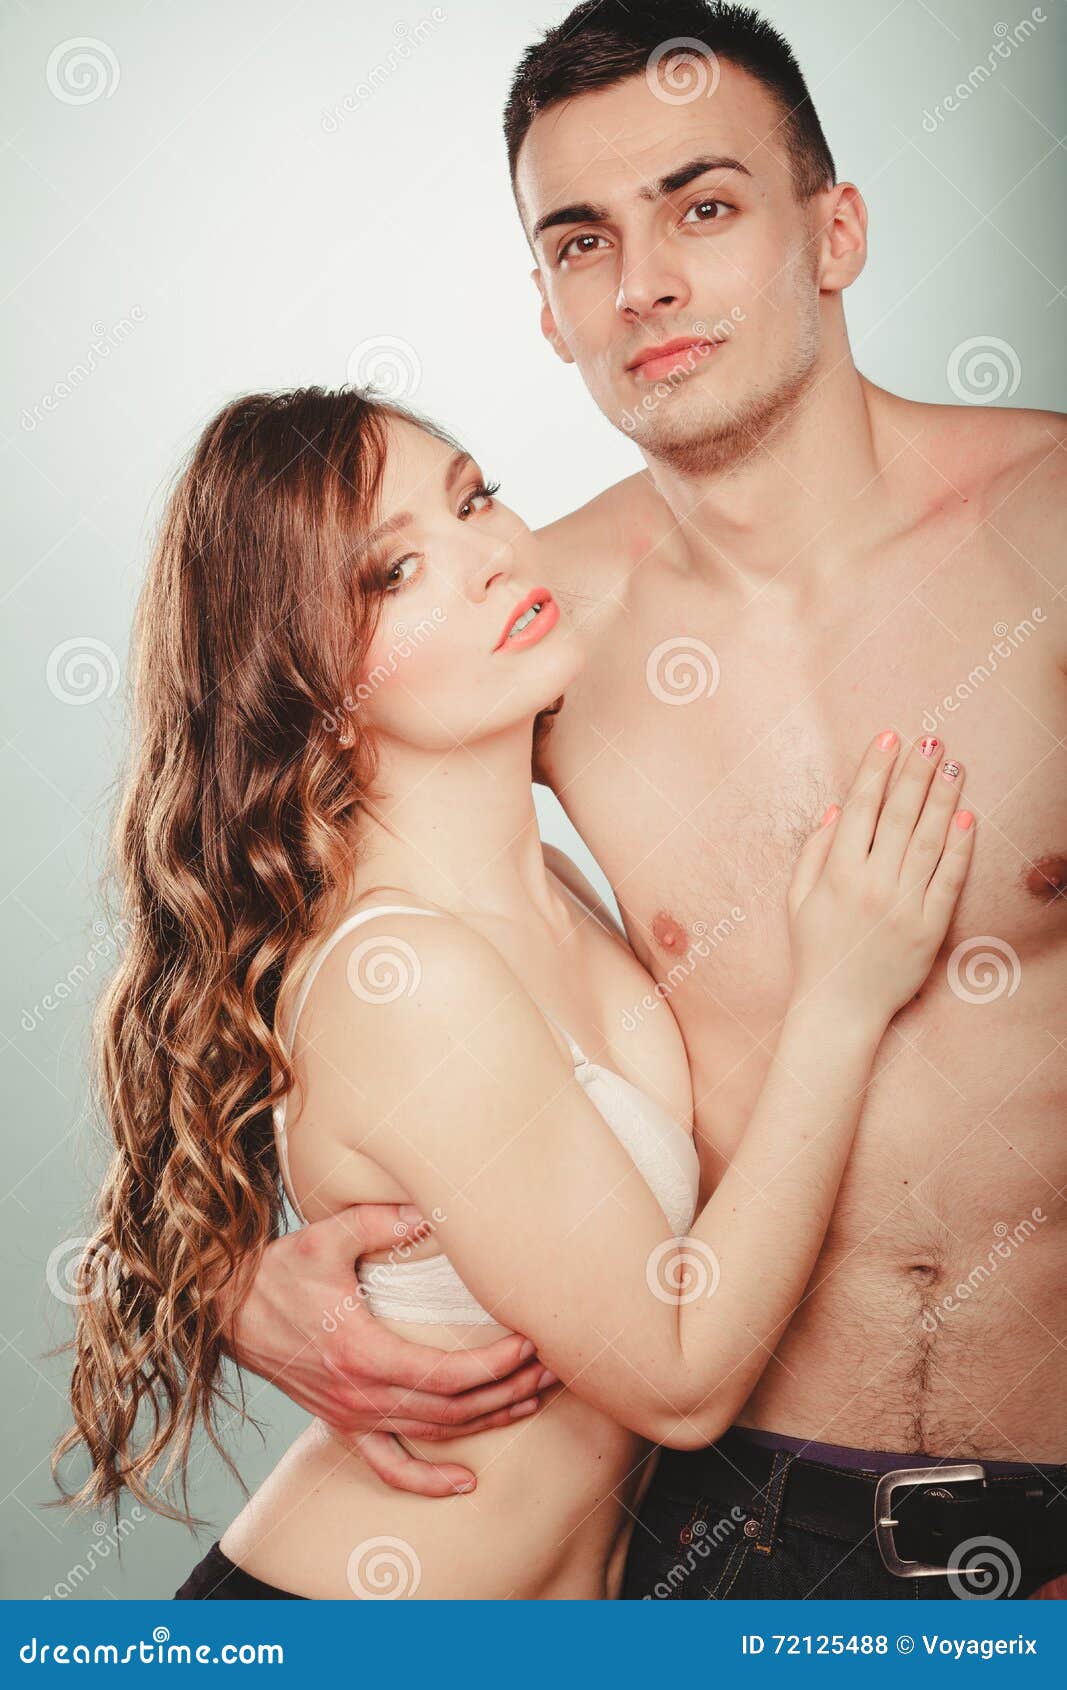 Naked sexy man and woman